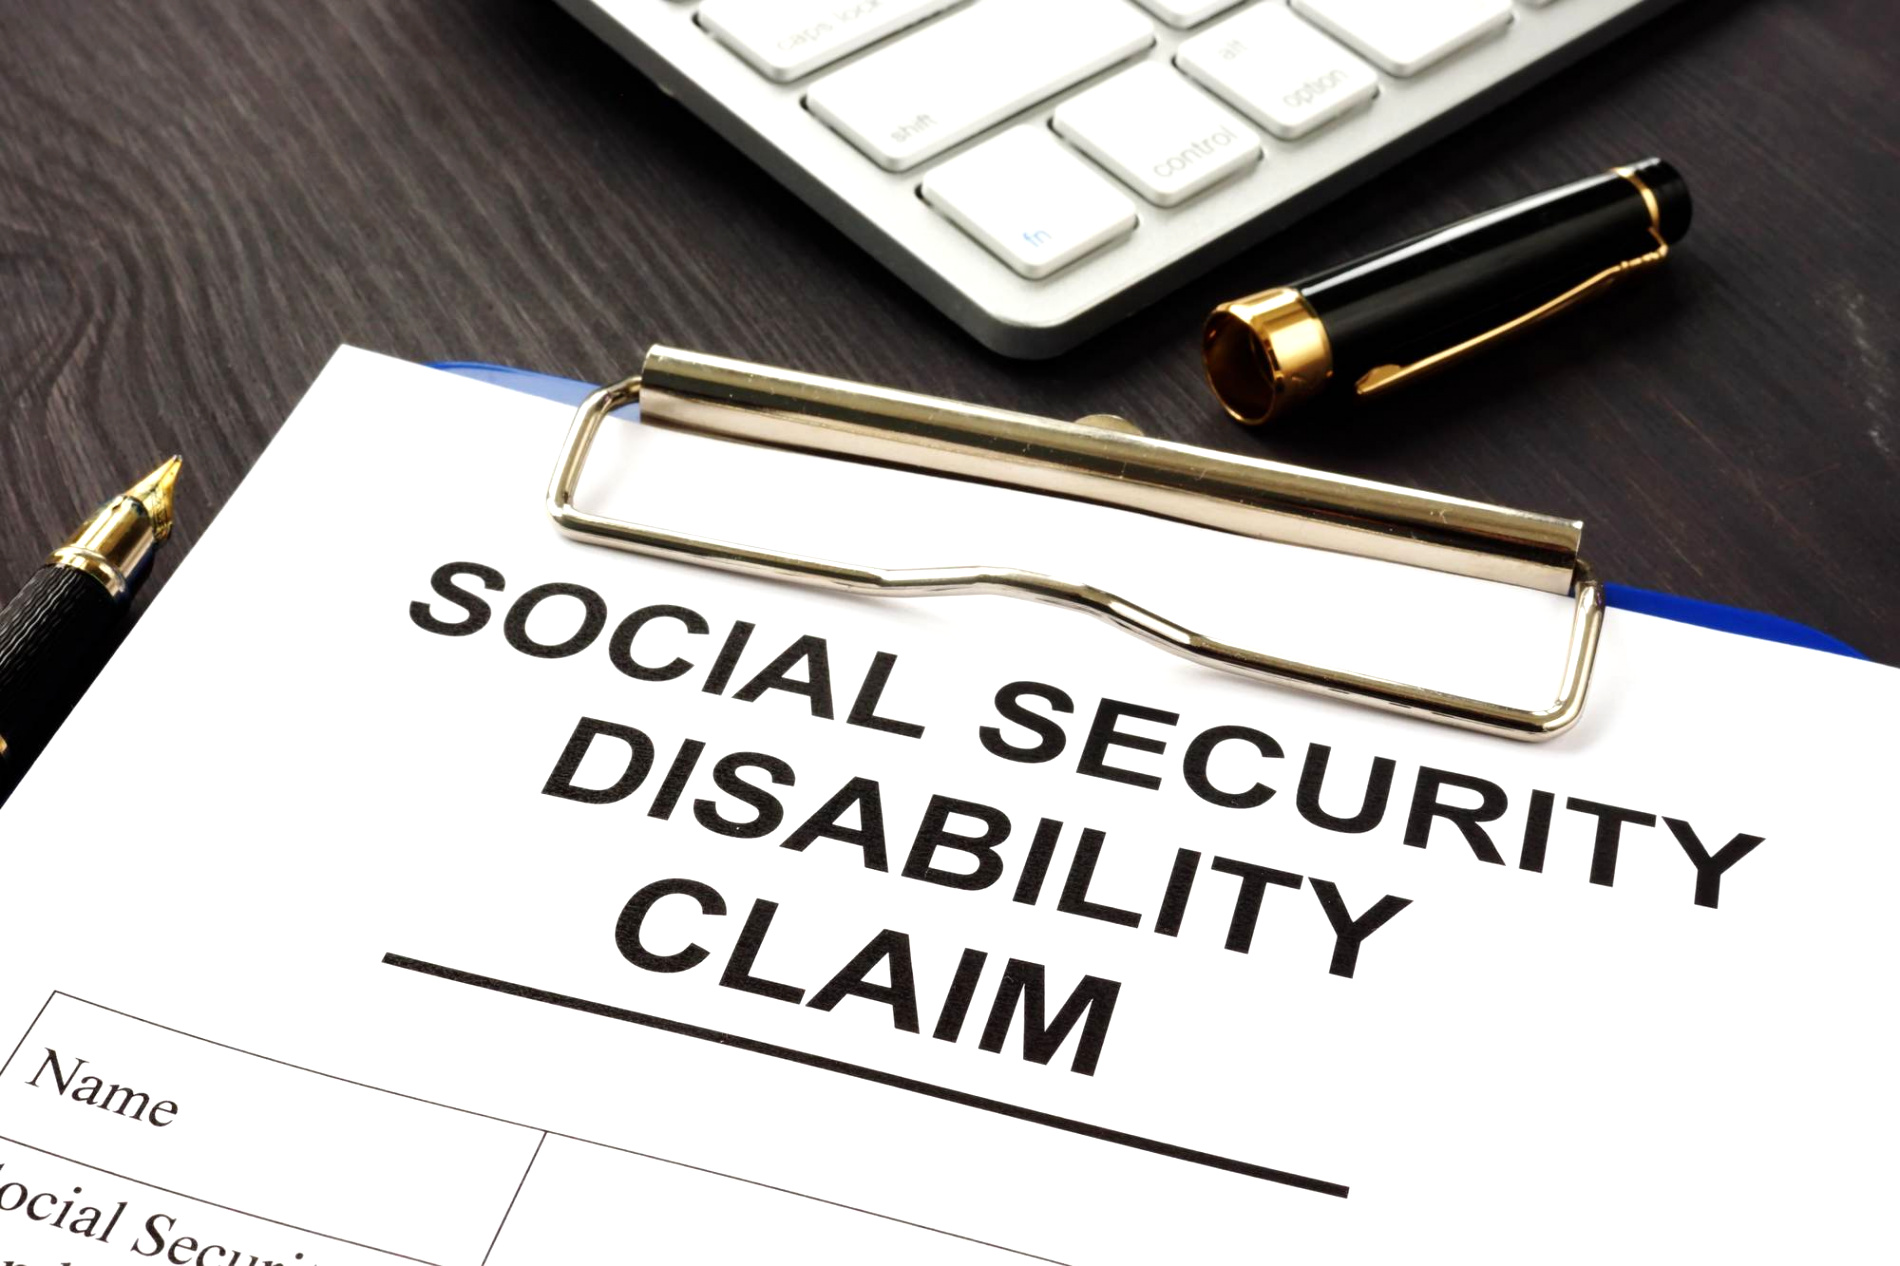 Auto Accident Lawyer Martinsburg Wv Dans How Do I File for social Security Disability